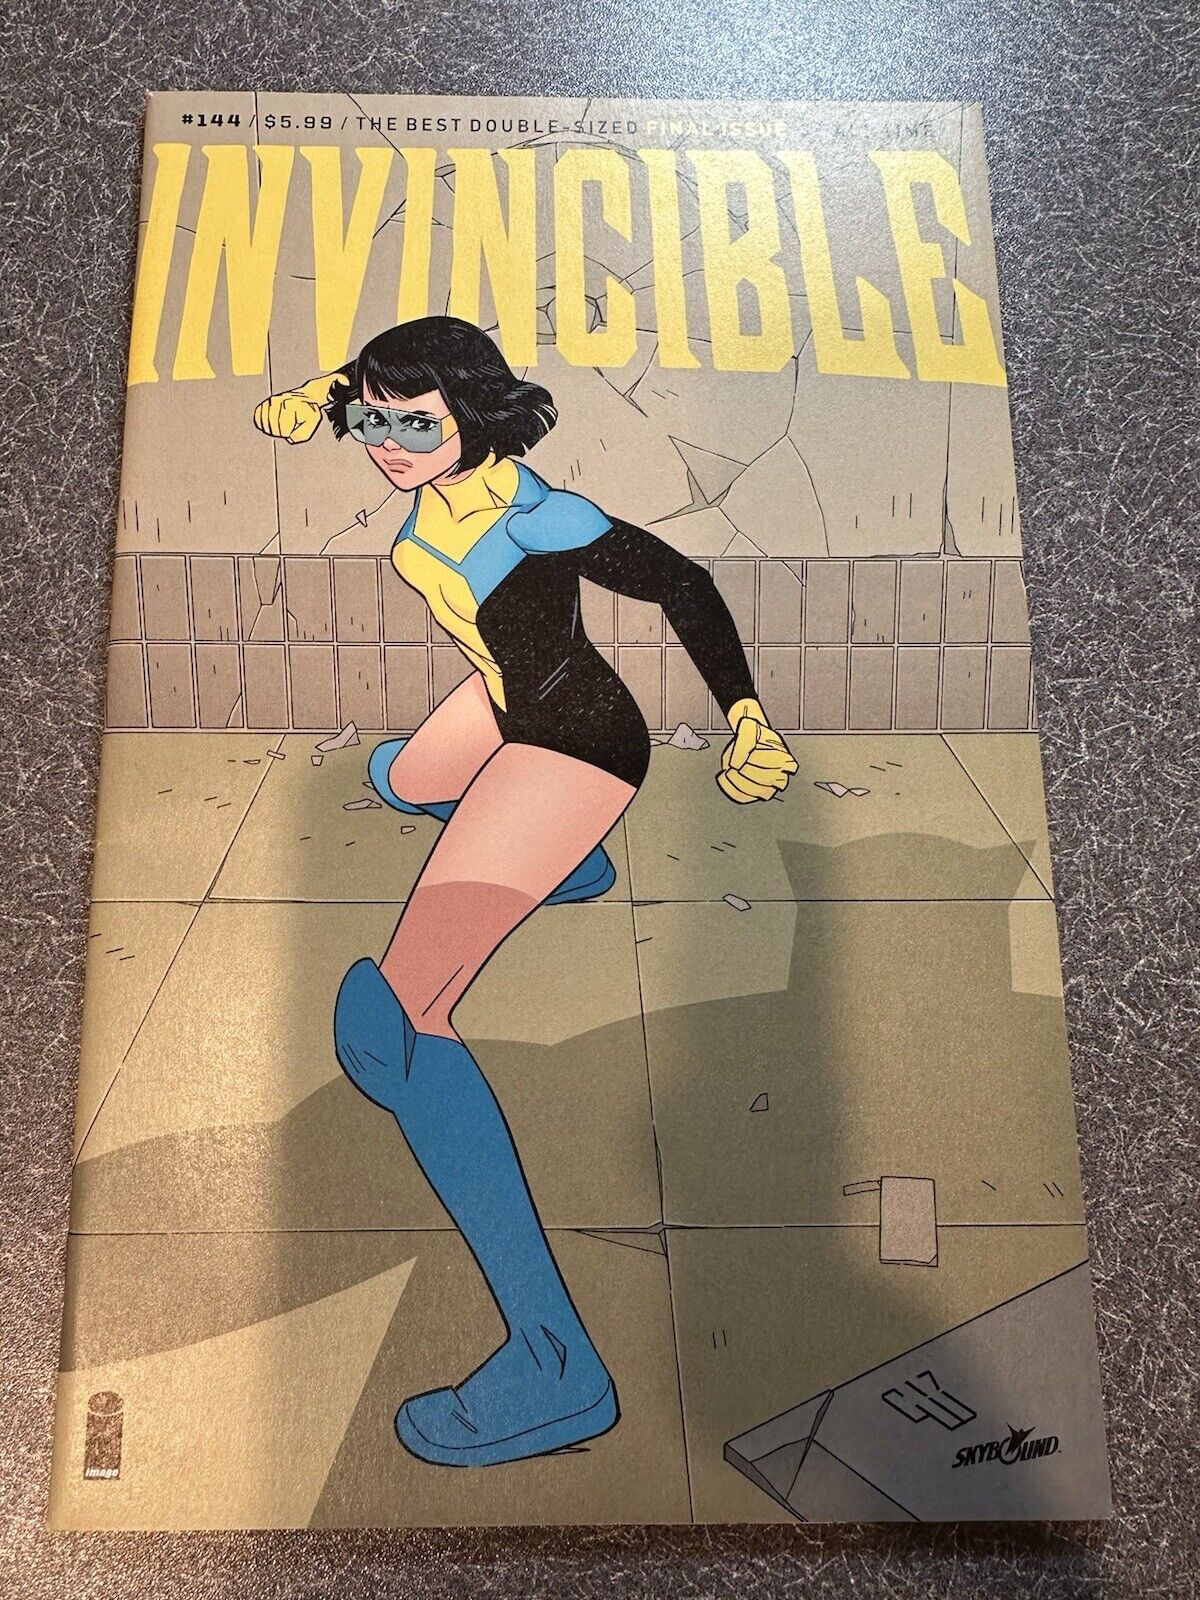 Invincible #144 (2004)  NM or Better  Kirkman Image  Last Issue